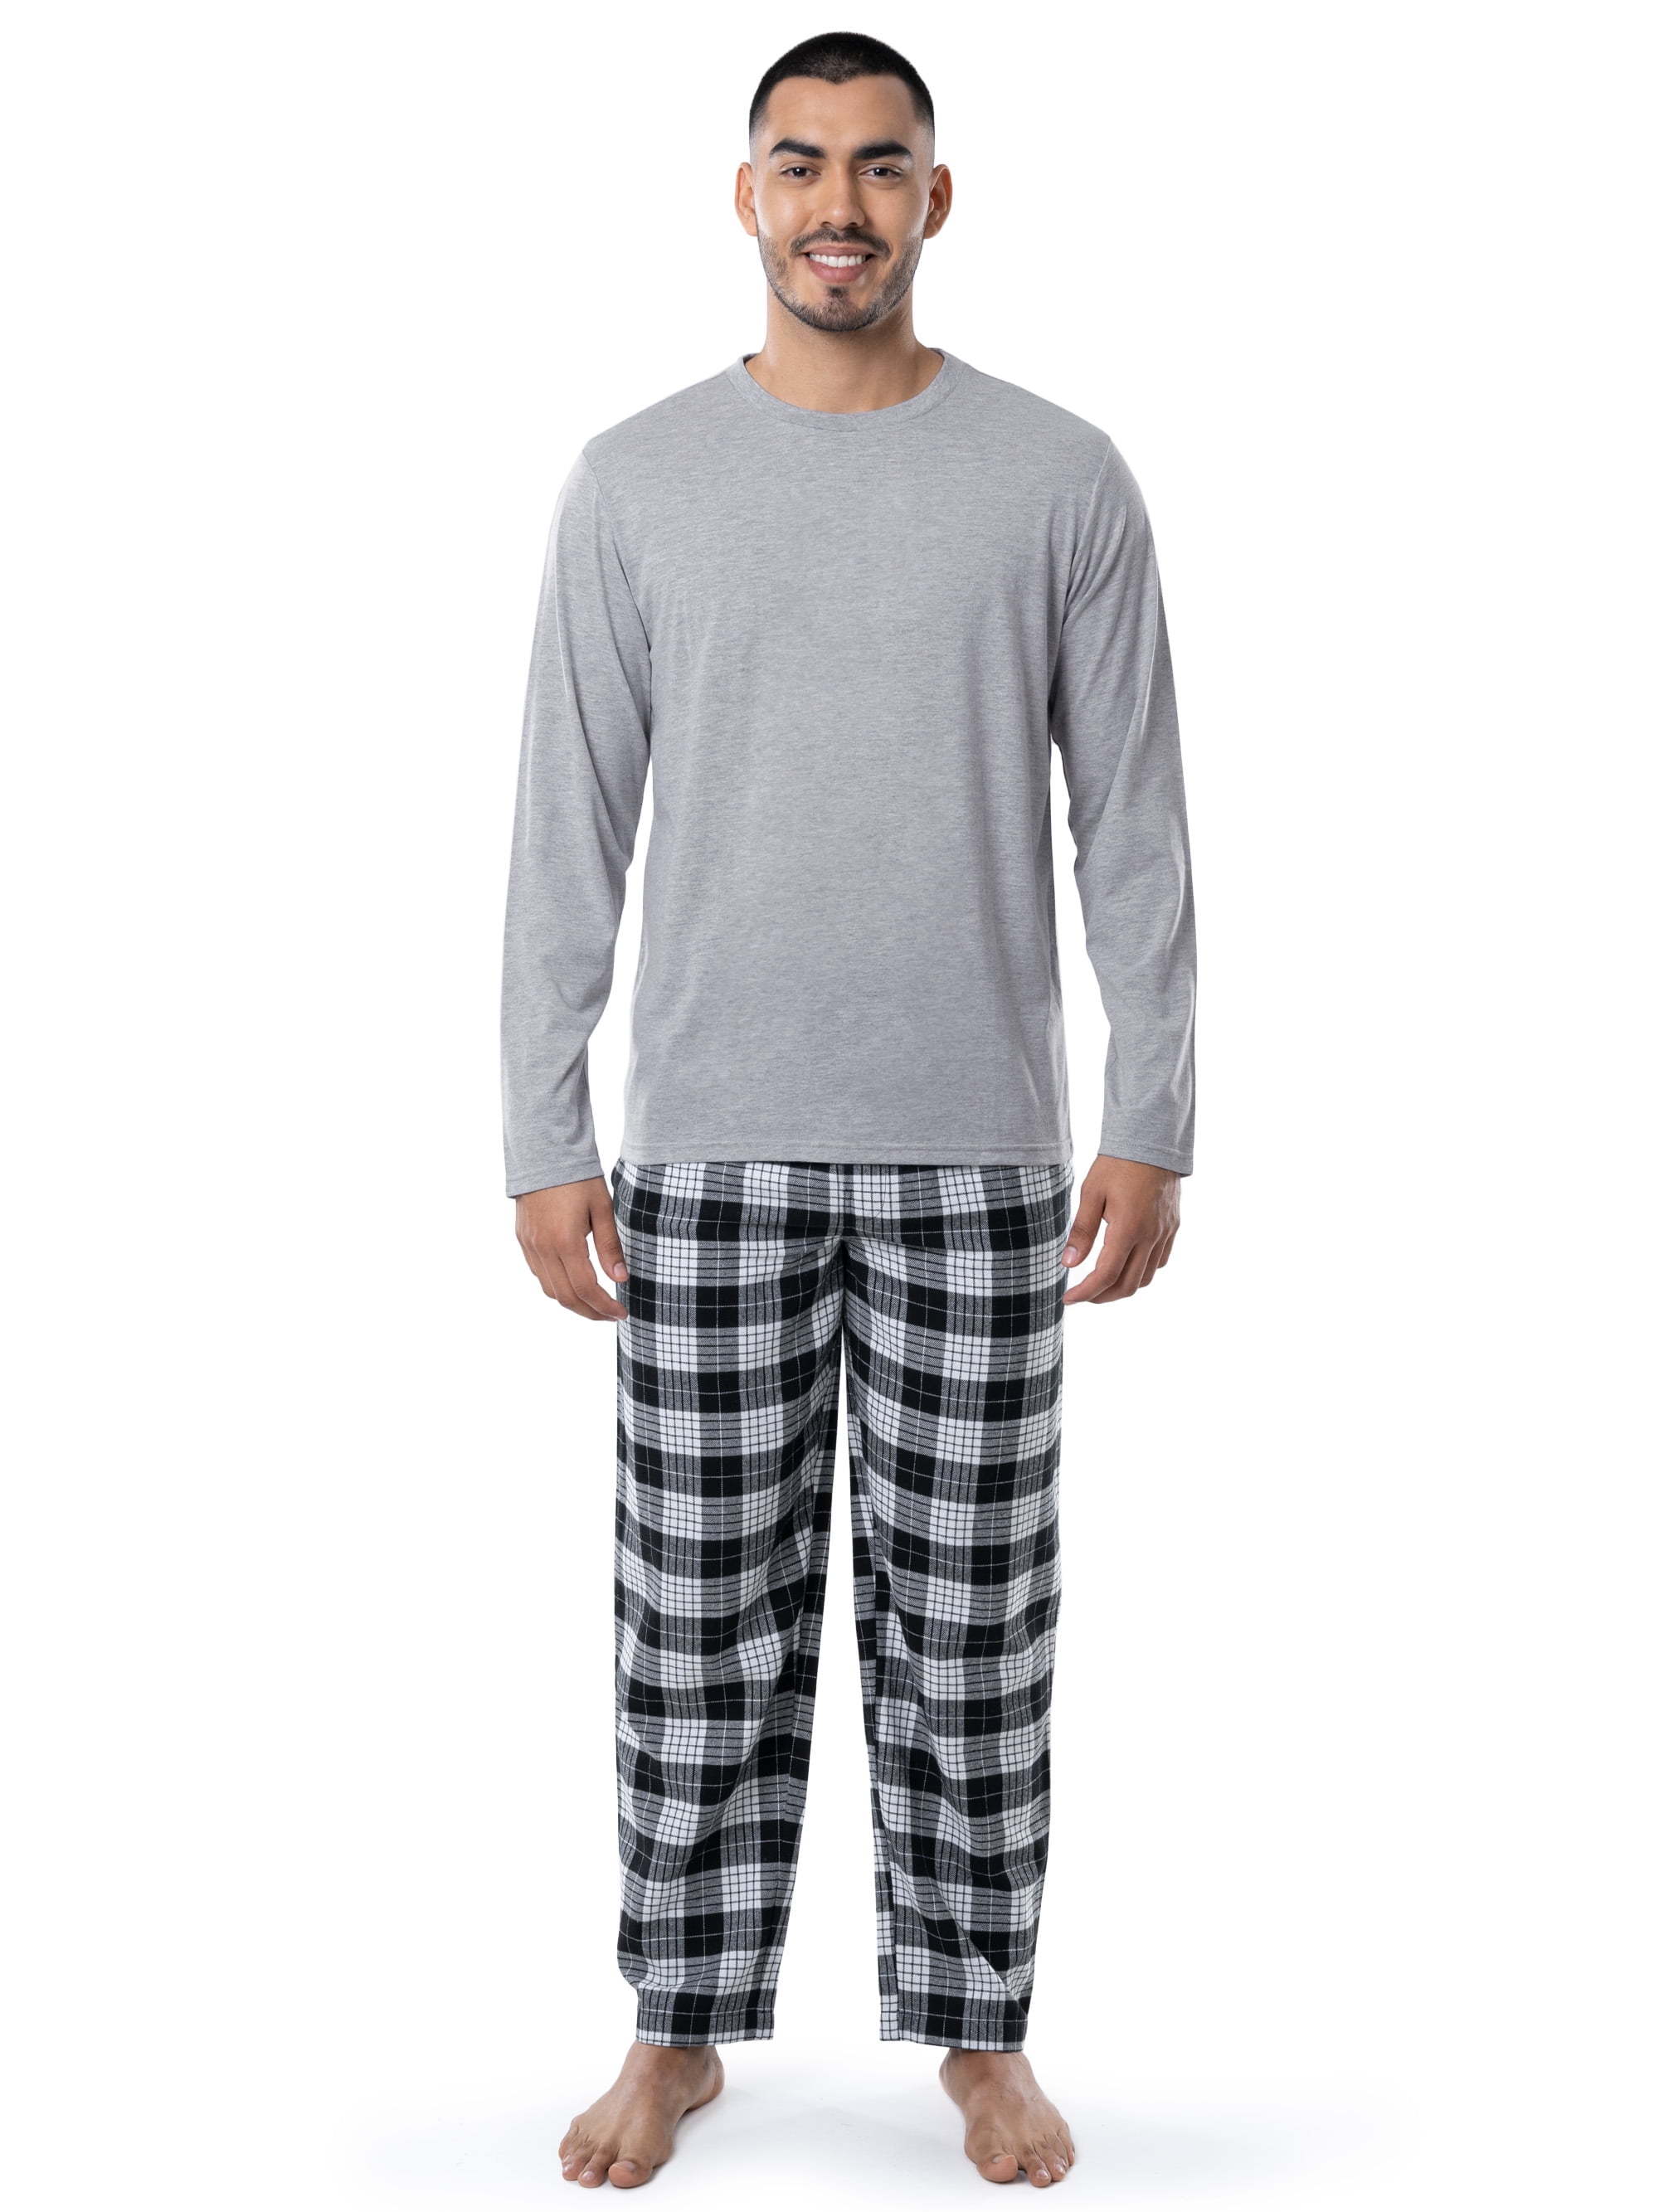 Fruit Of The Loom Men's Jersey Knit Top and Flannel Pajama Pants Set, 2 ...